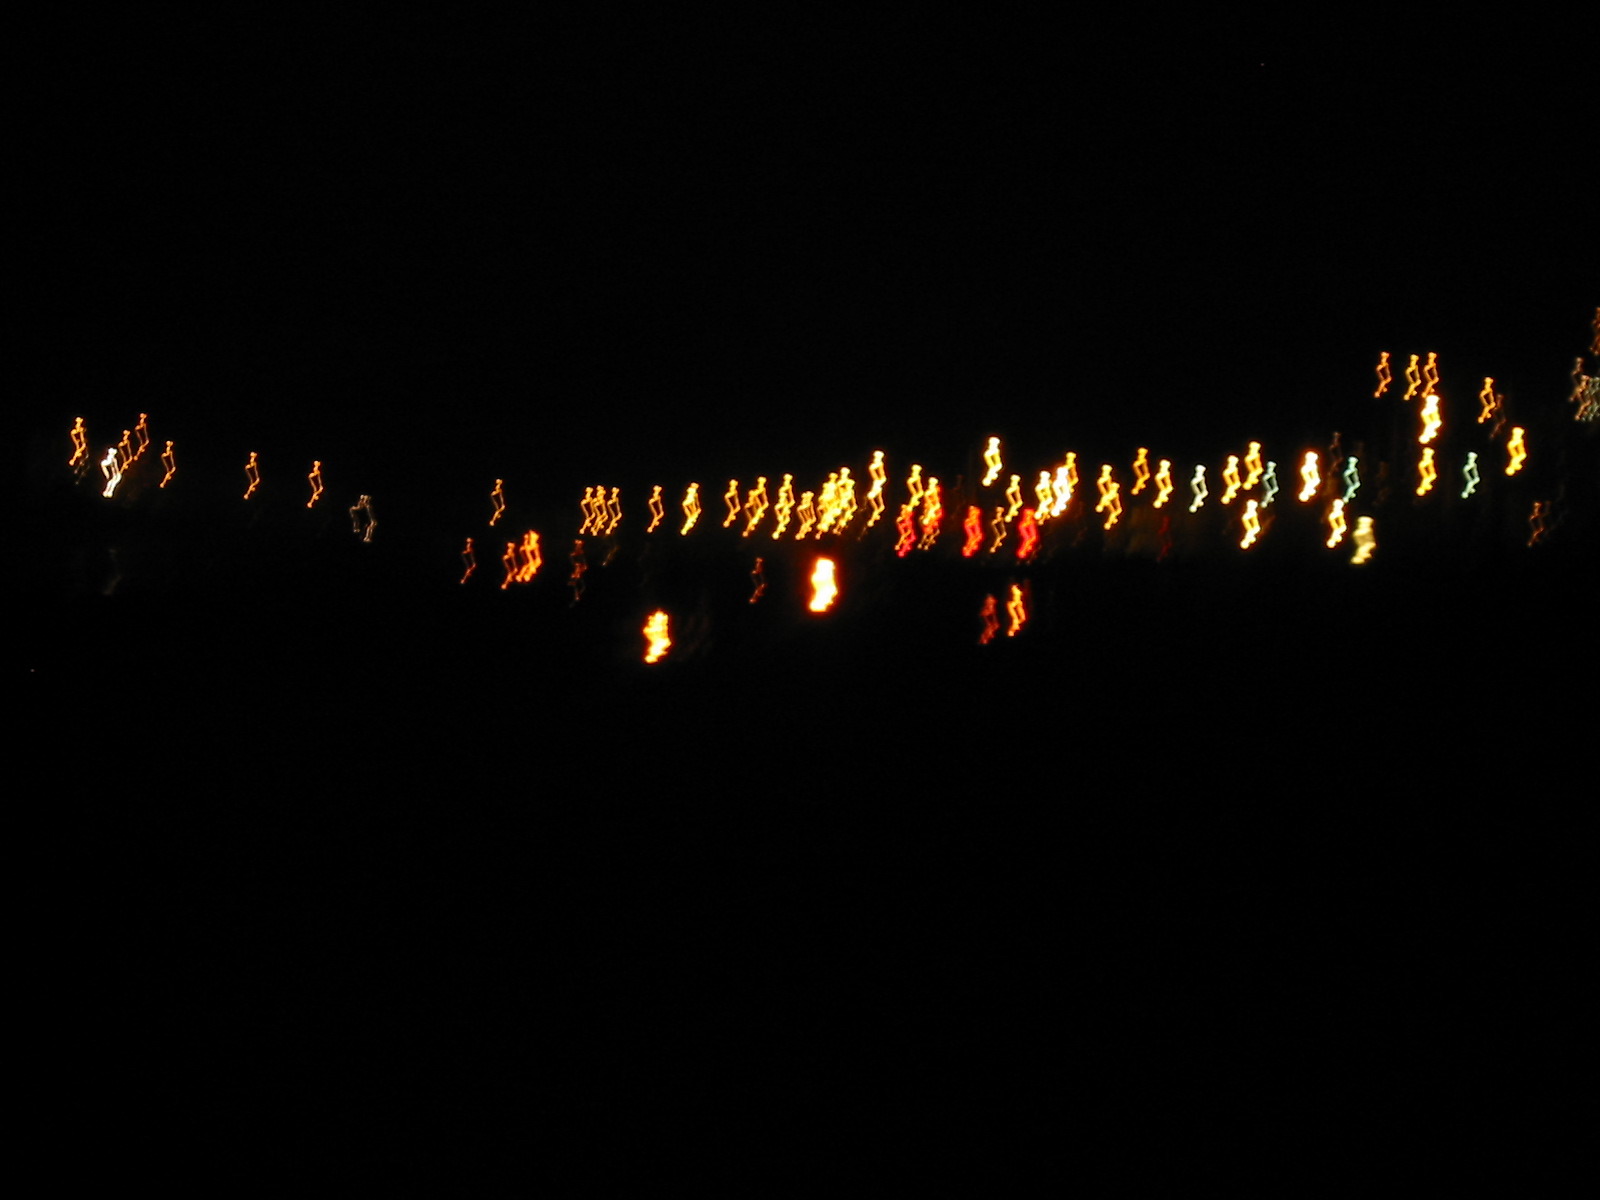 lights by the road